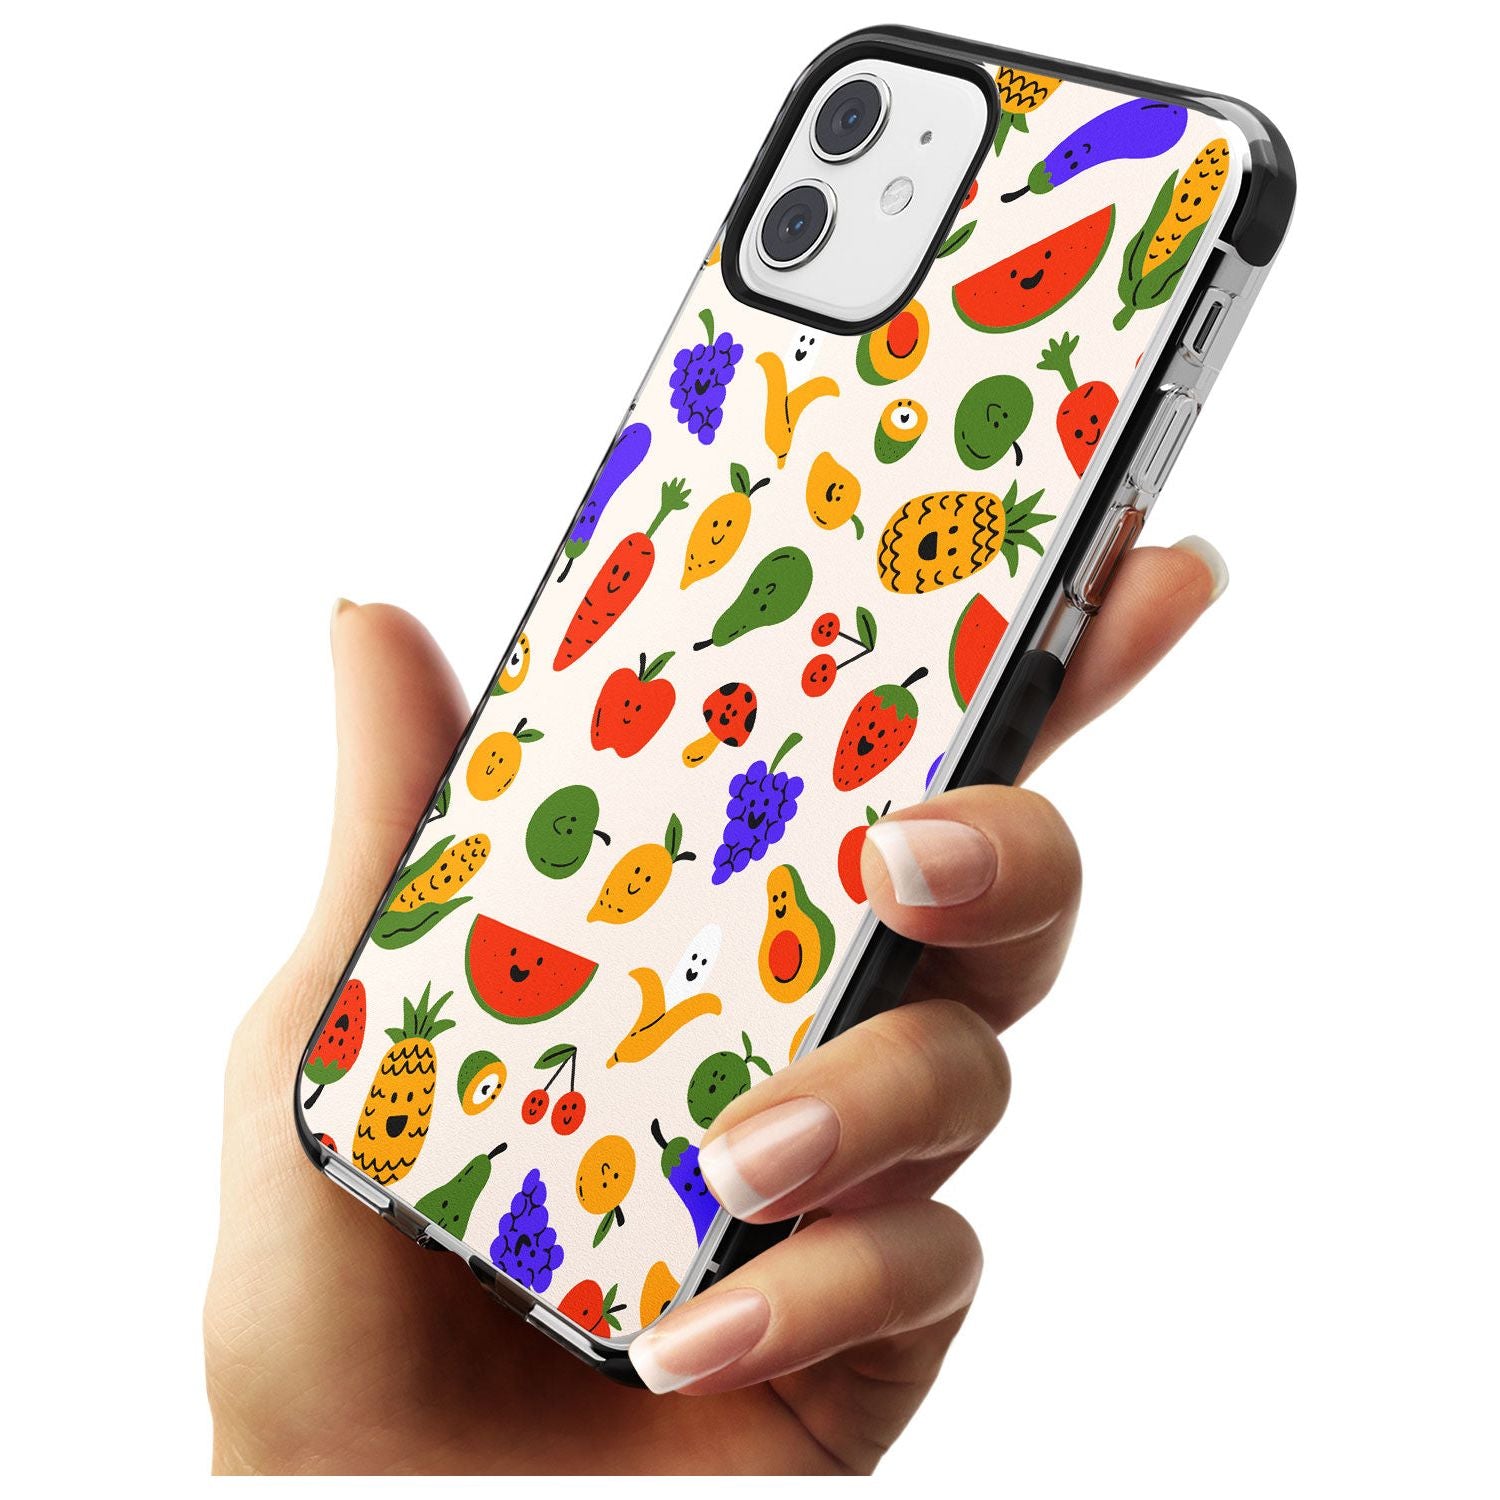 Mixed Kawaii Food Icons - Solid iPhone Case Black Impact Phone Case Warehouse 11